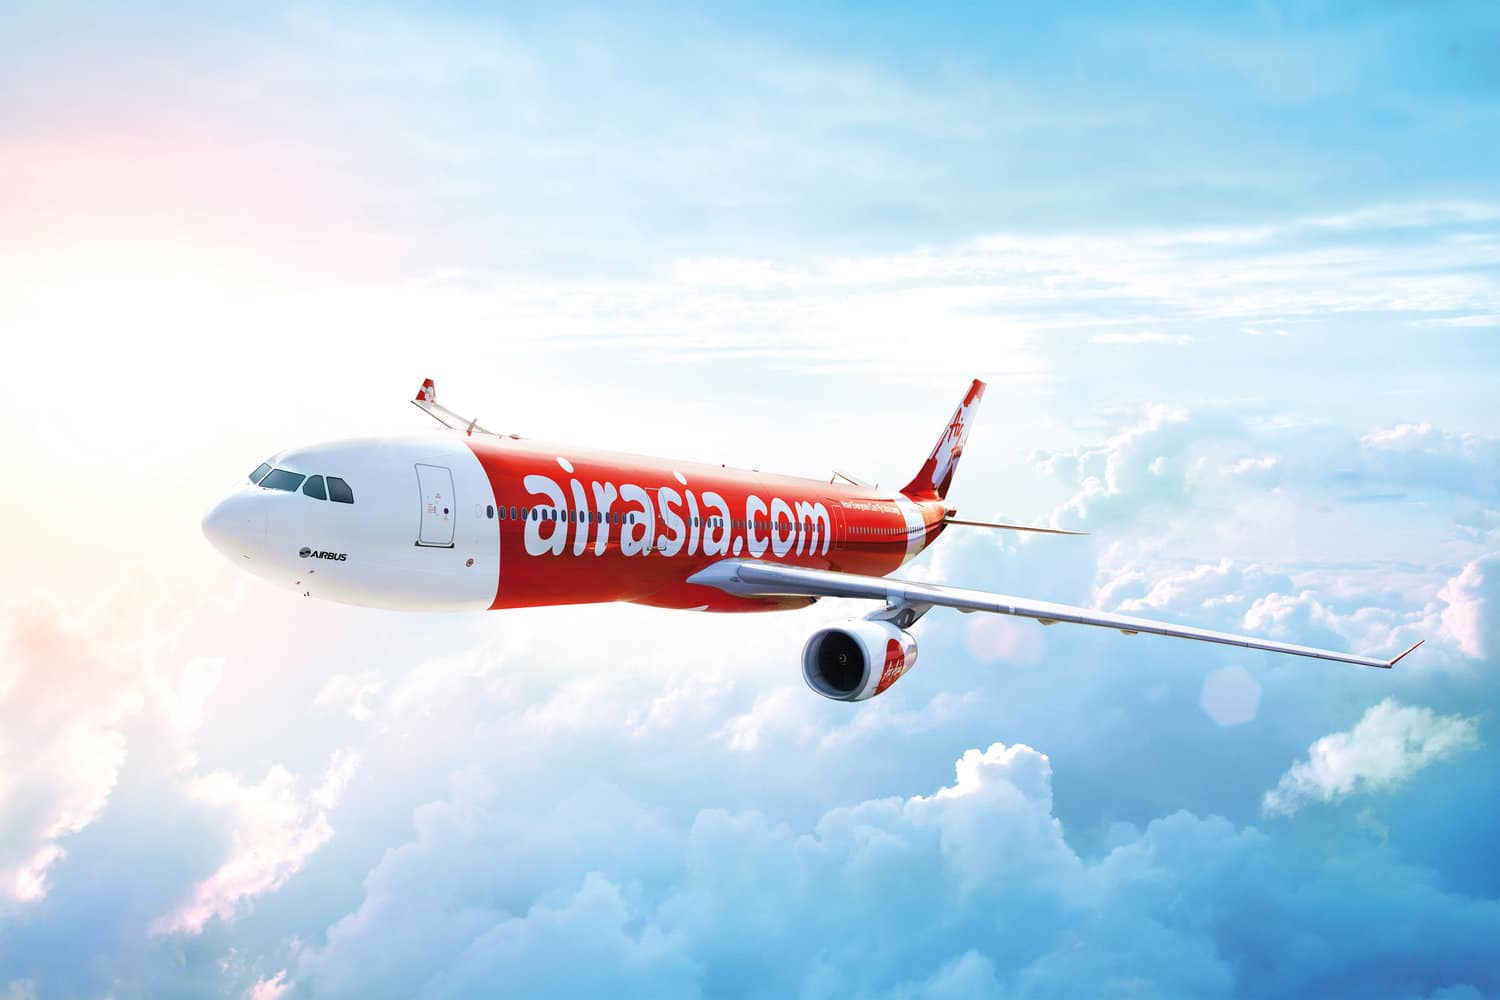 Unit 713 was previously leased to AirAsia X, but had been idled since March. (Photo: AirAsia)